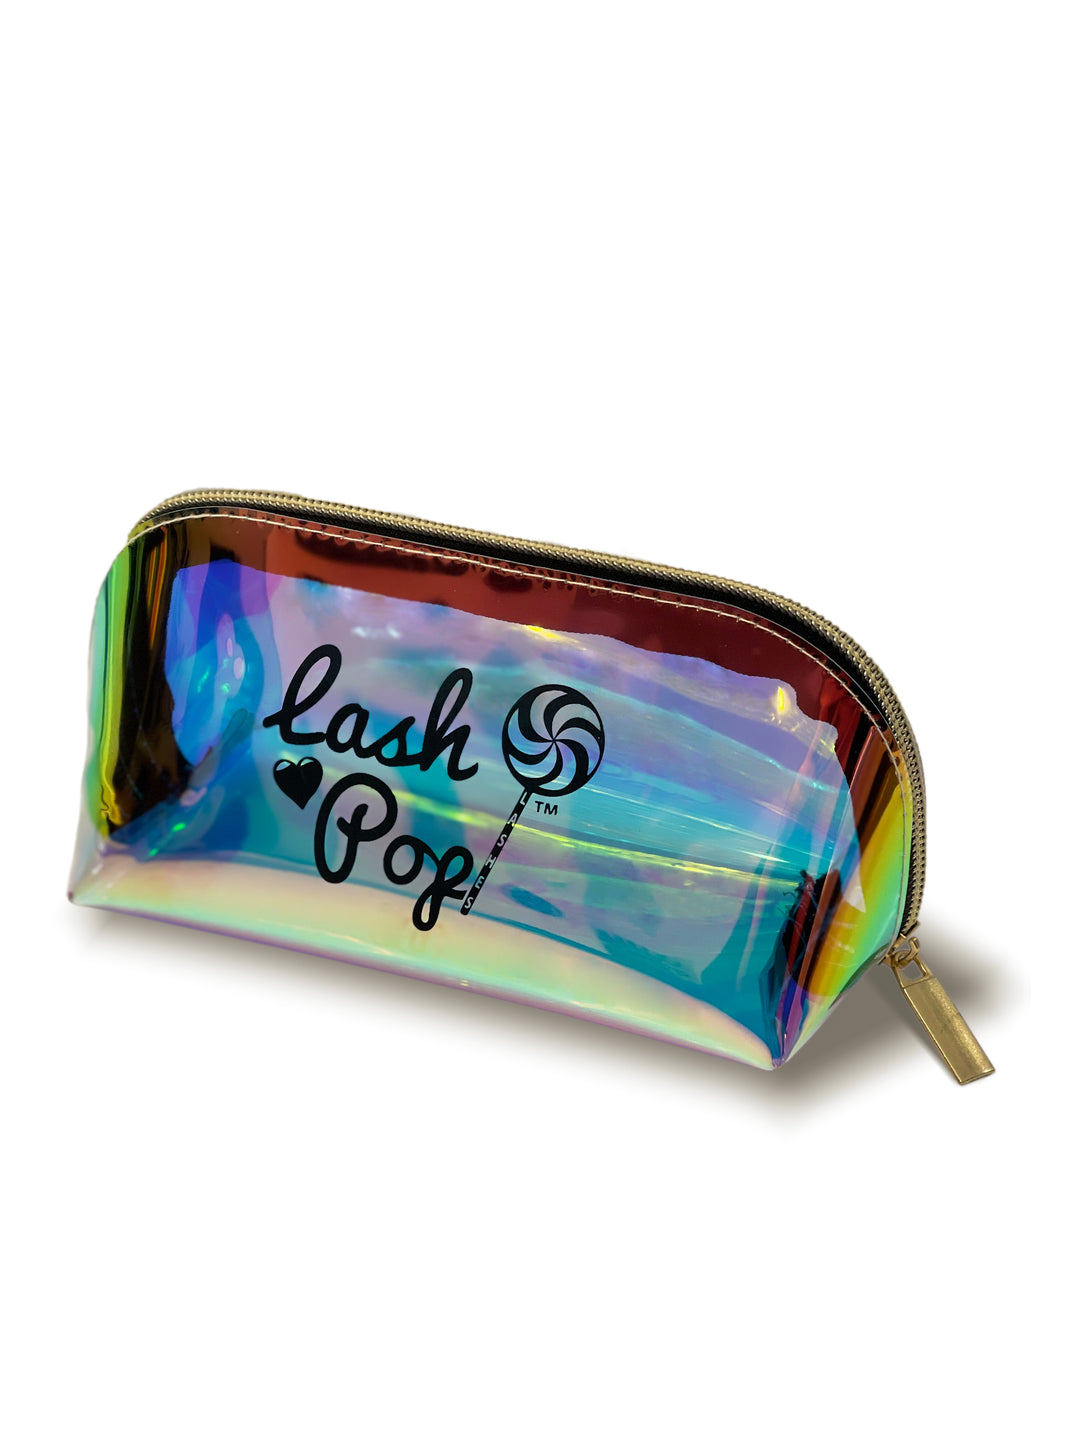 The "all you need..." Lash Pop Lashes Makeup Bag (12 units)